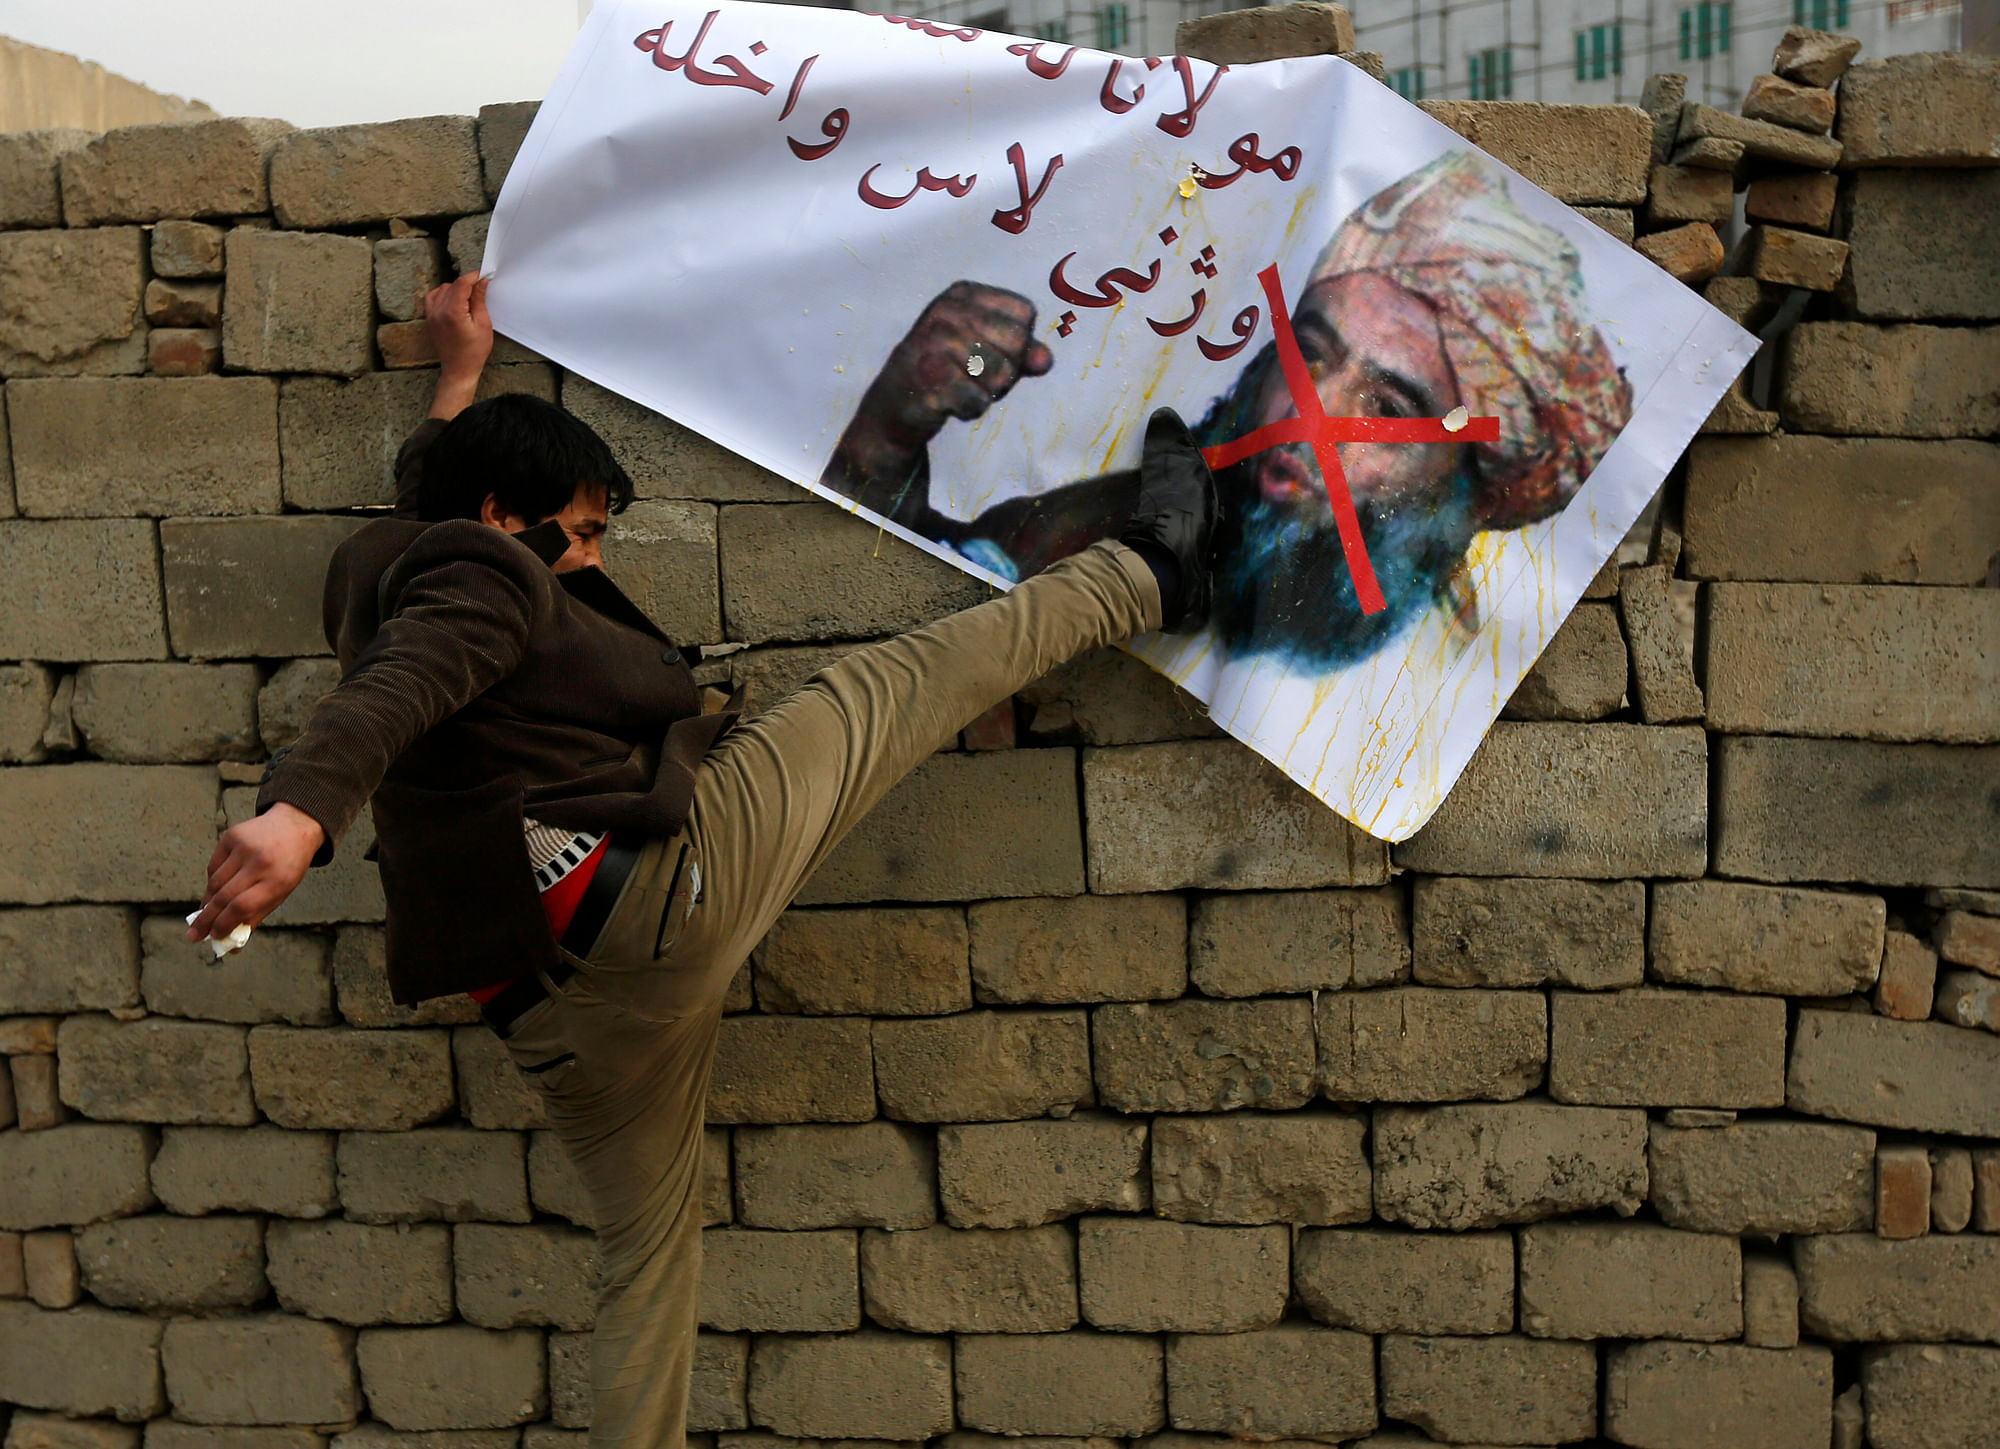 An Afghan man kicks a poster of Pakistani religious leader Maulana Fazlur Rehman during a demonstration against his visit in Kabul (Photo: Reuters)